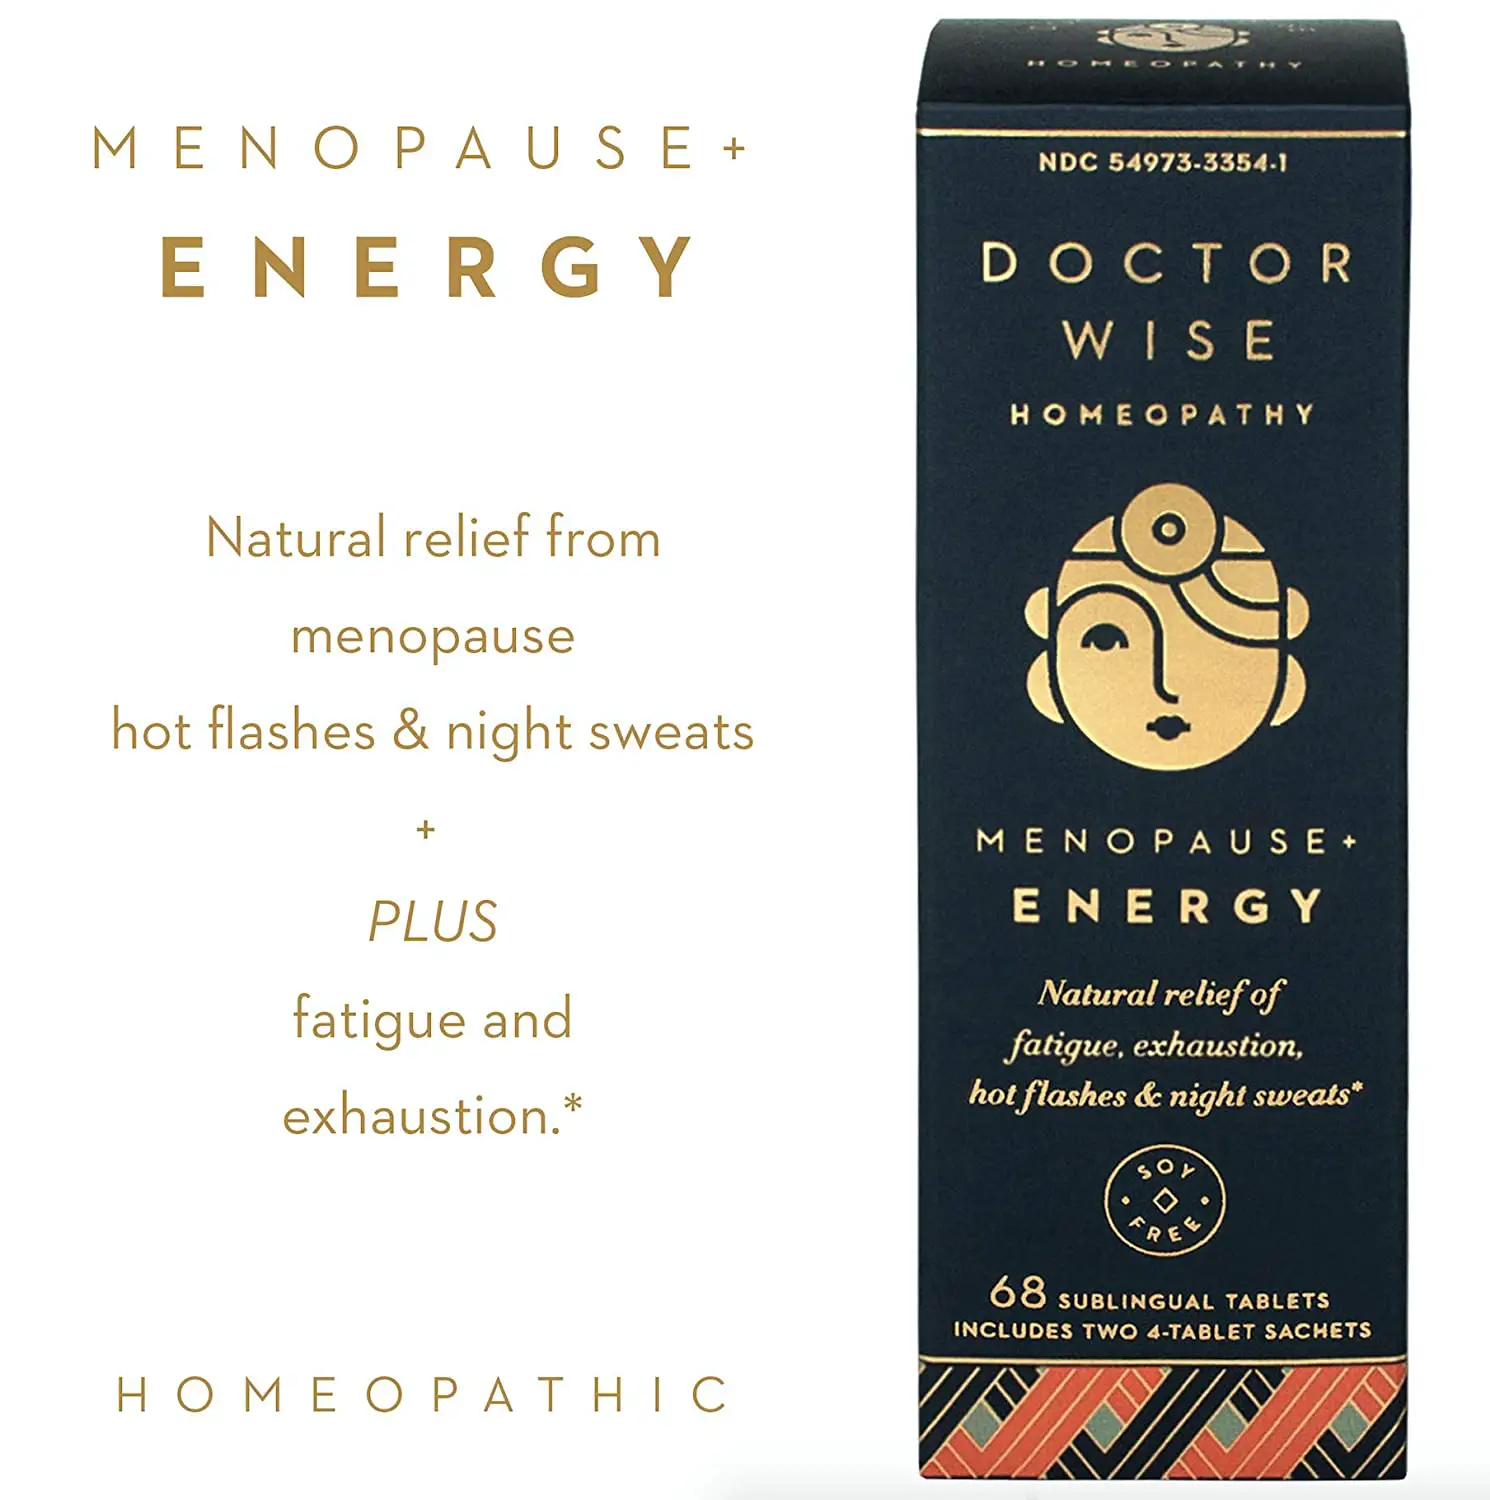 Amazon.com: Menopause Natural Homeopathic Relief of Fatigue, Exhaustion ...